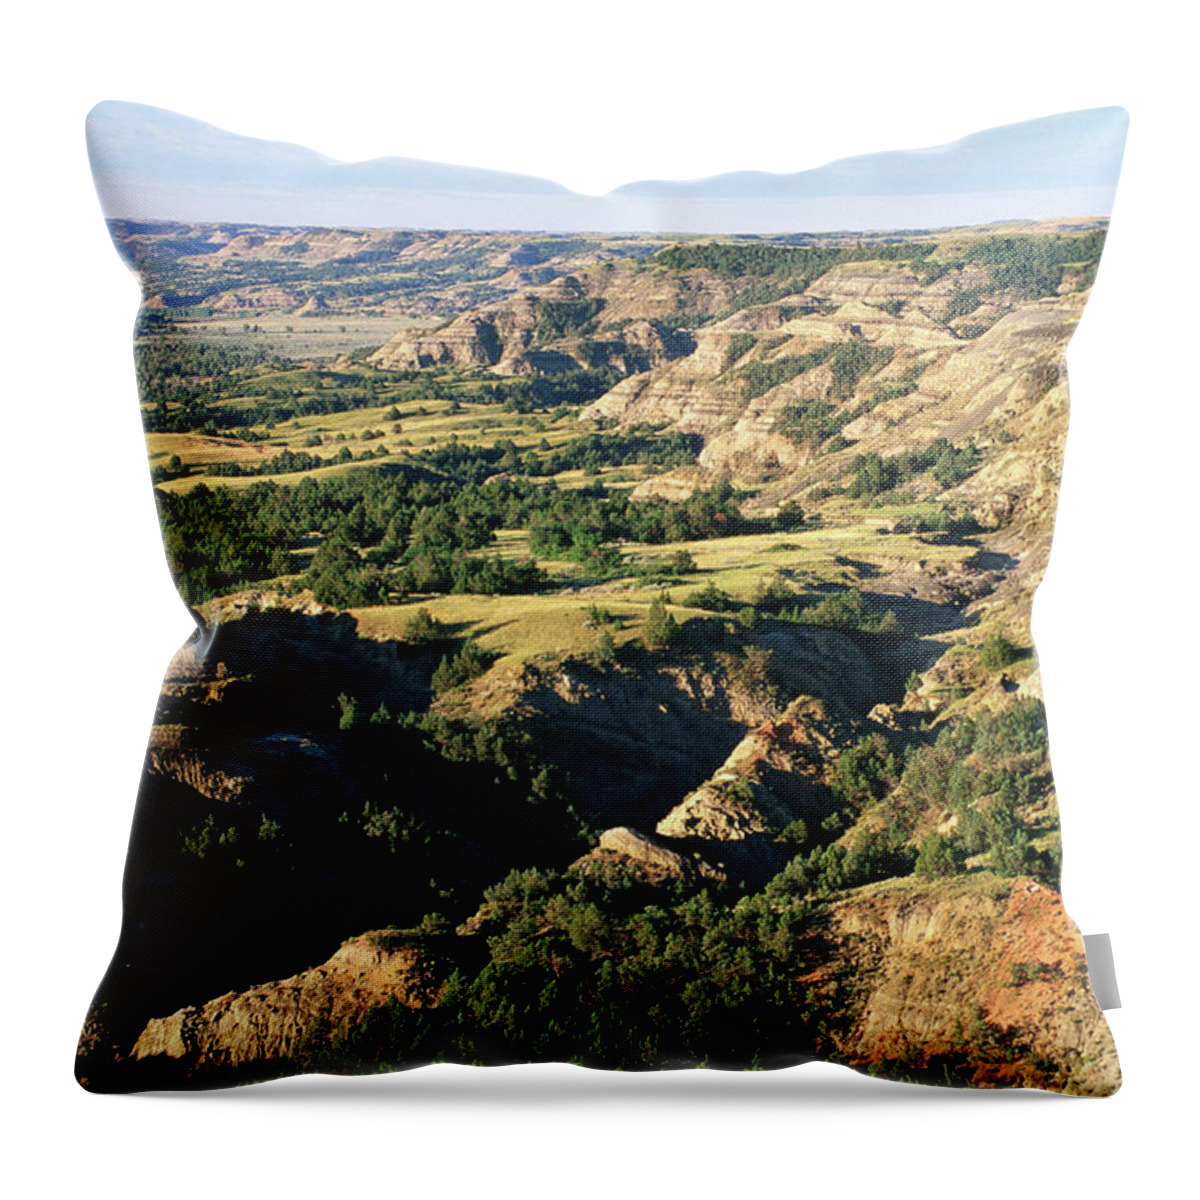 Scenics Throw Pillow featuring the photograph Little Missouri River Valley From Oxbow by John Elk